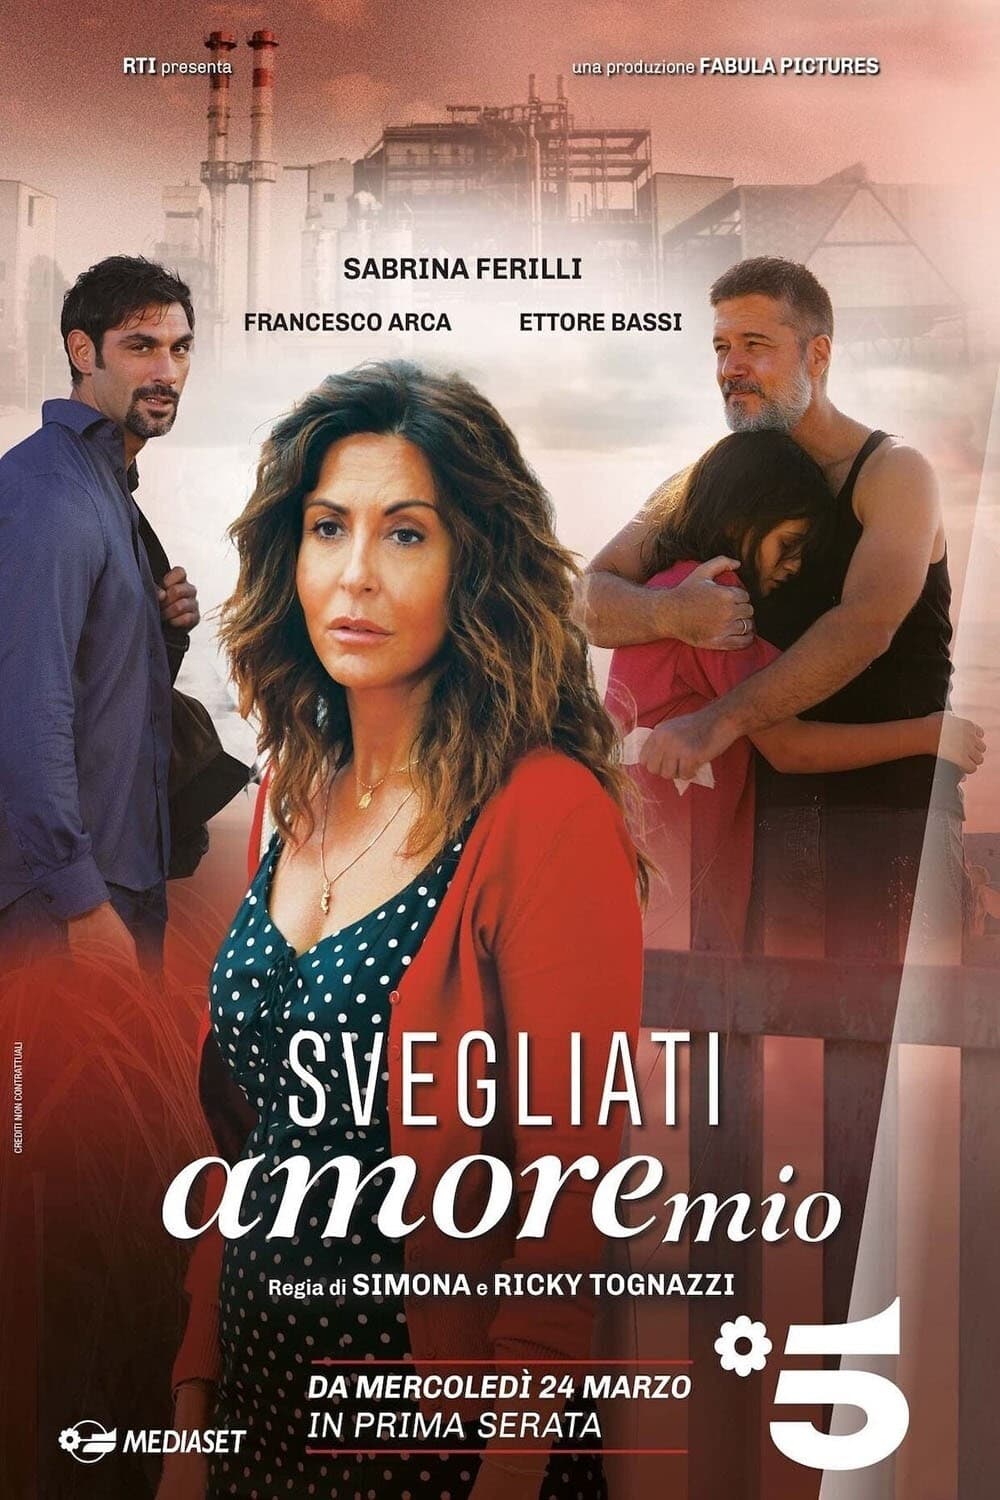 TV ratings for Wake Up My Love (Svegliati Amore Mio) in the United States. Canale 5 TV series